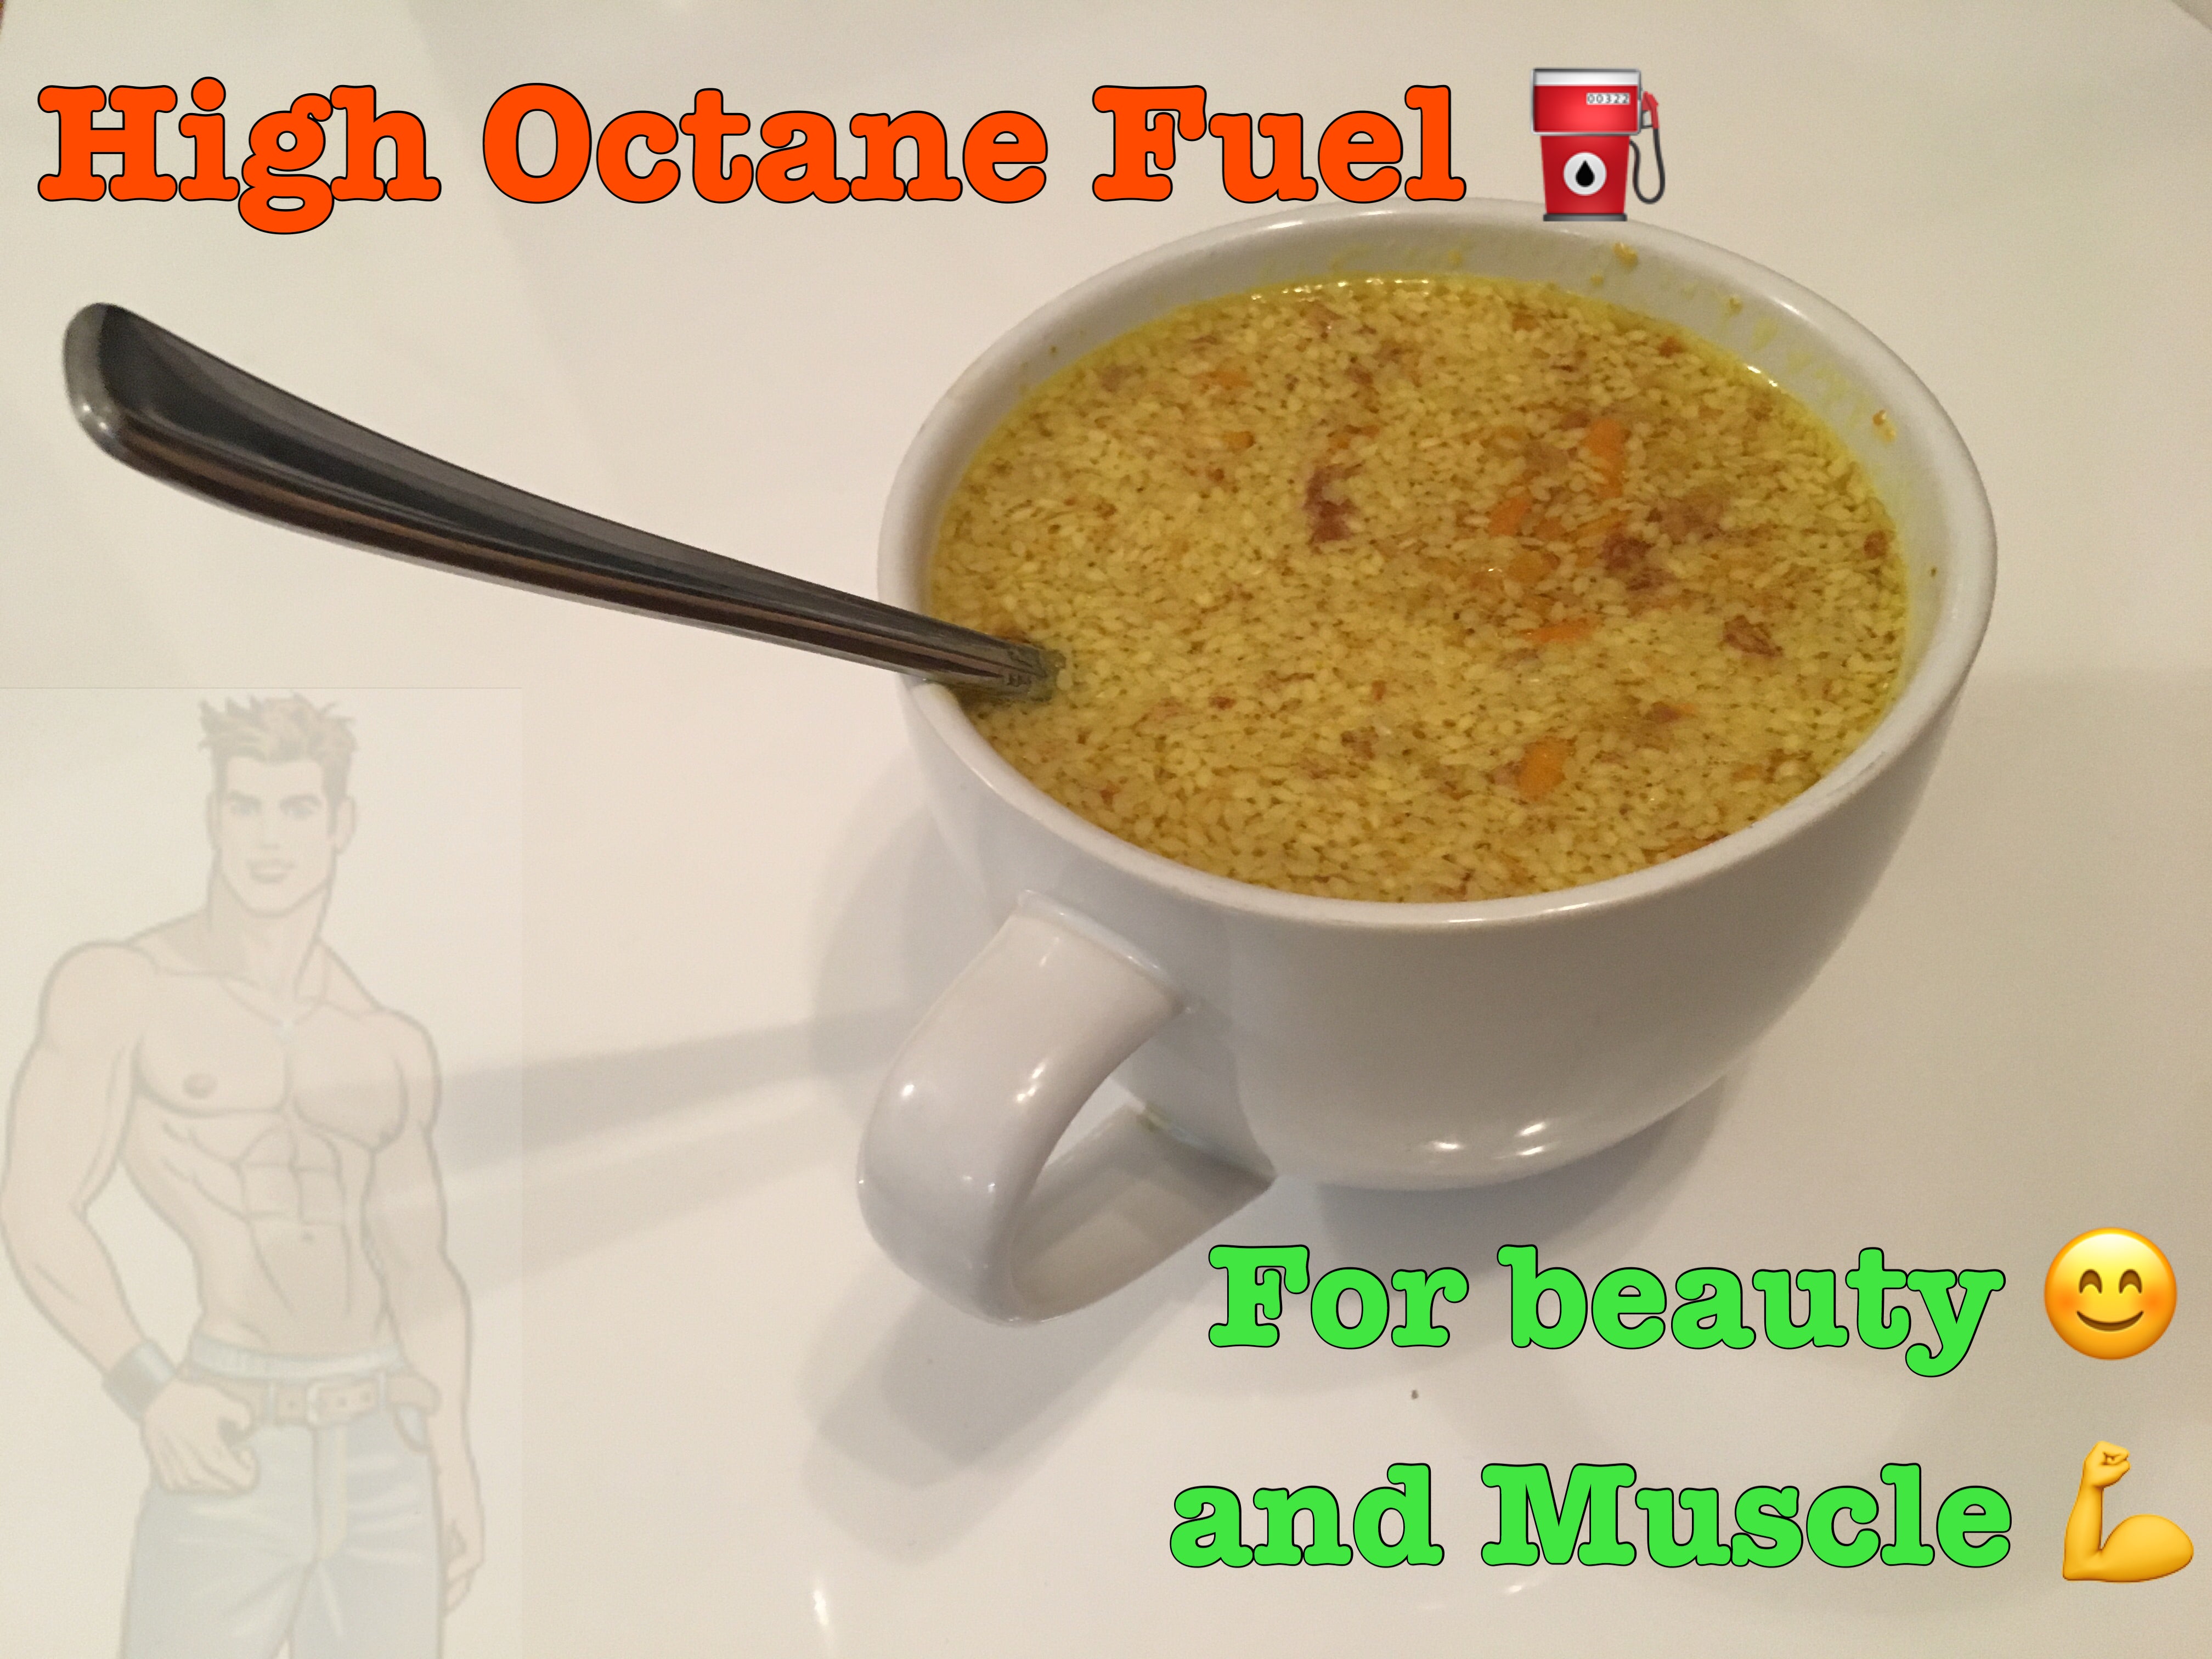 High Octane Bone Broth Fuel for Beauty and Muscle